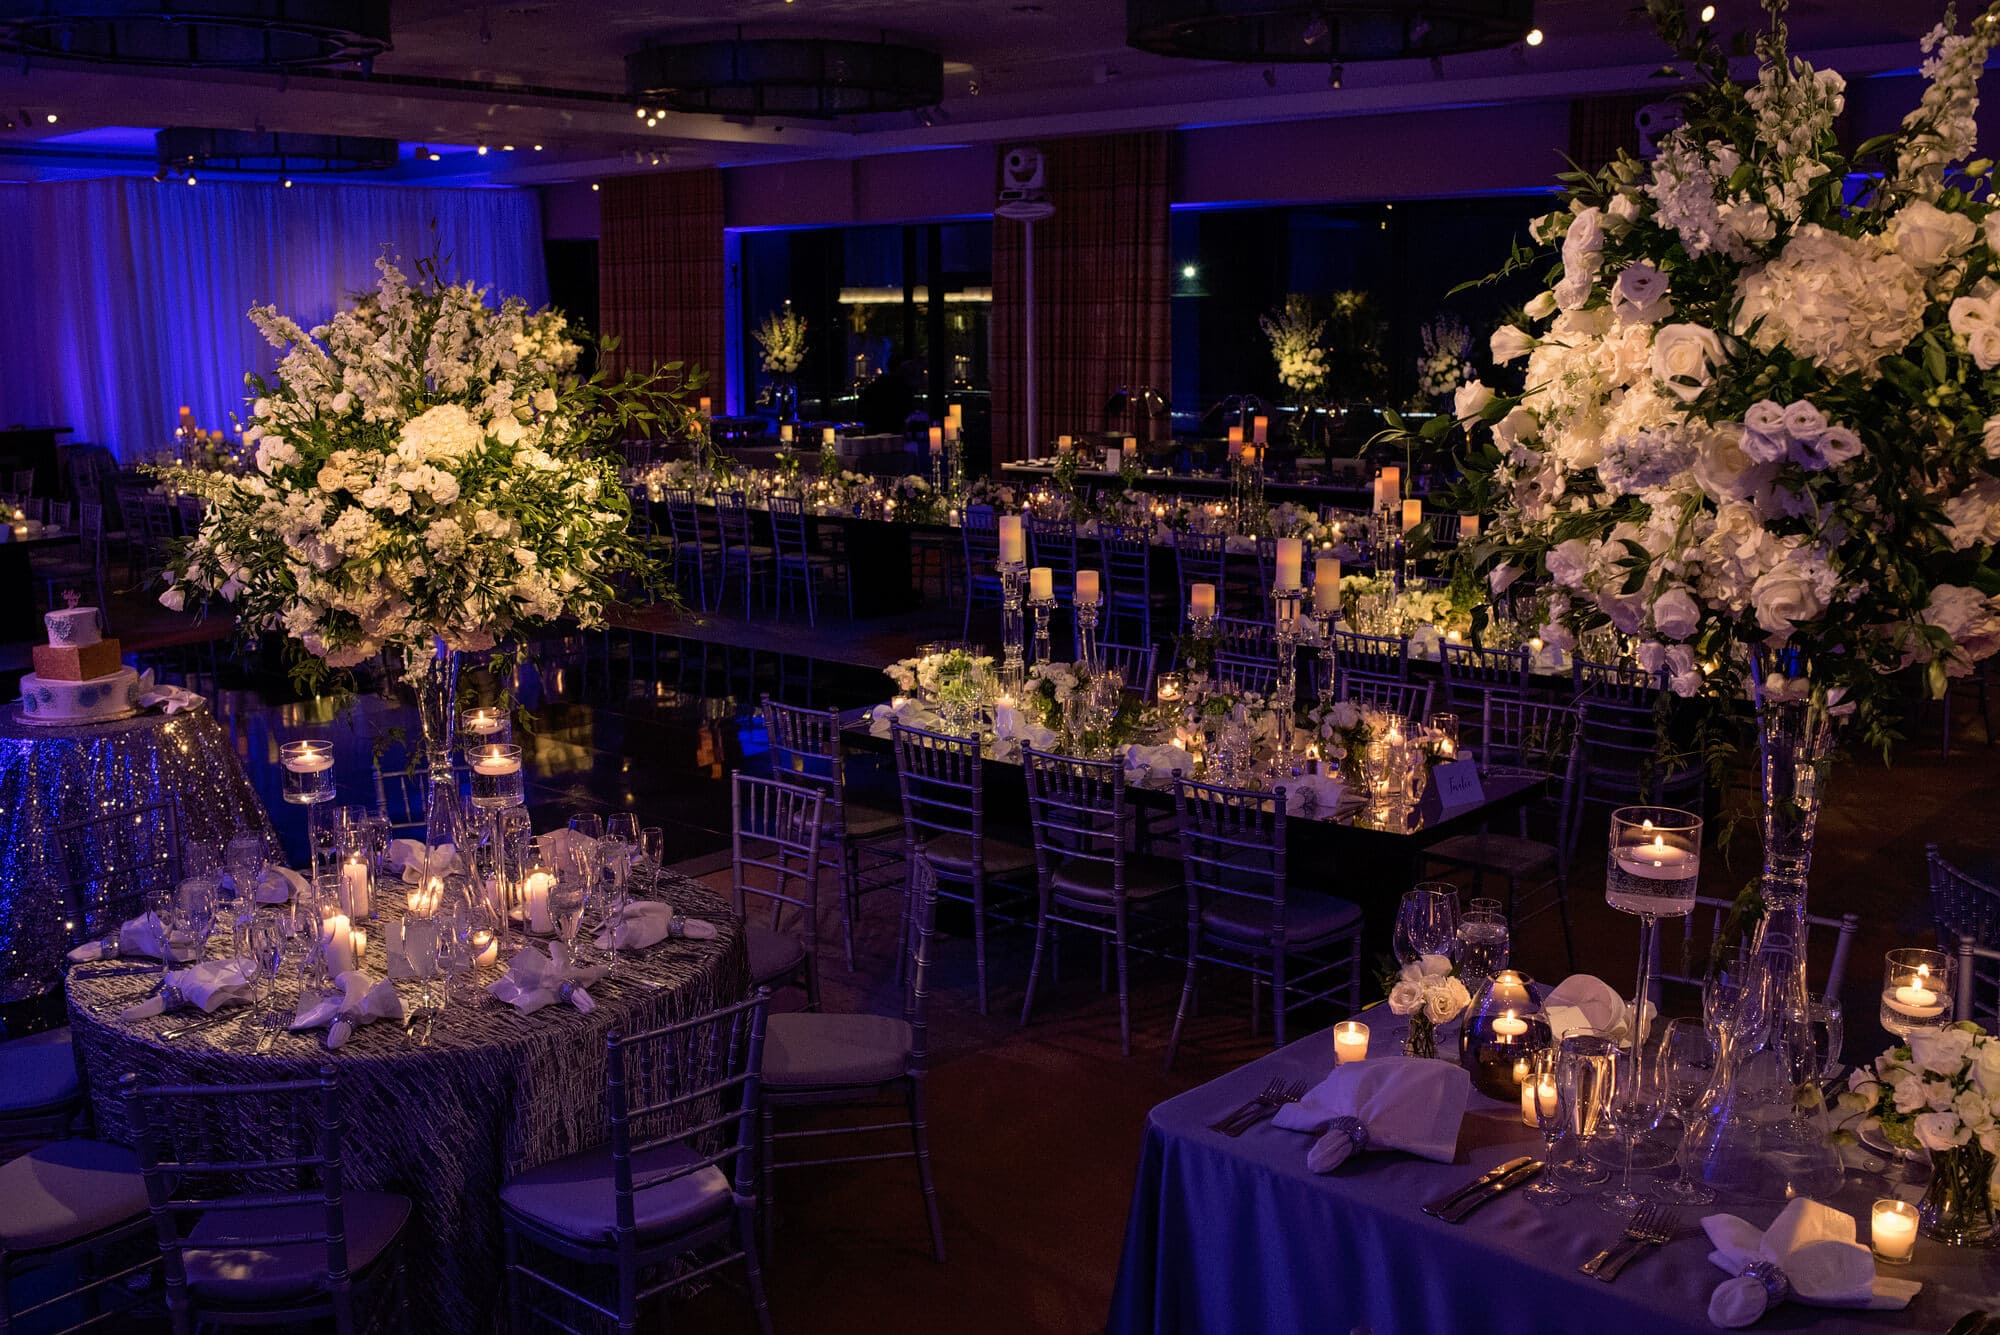 incredible florals by orly khon at seaport world trade center wedding